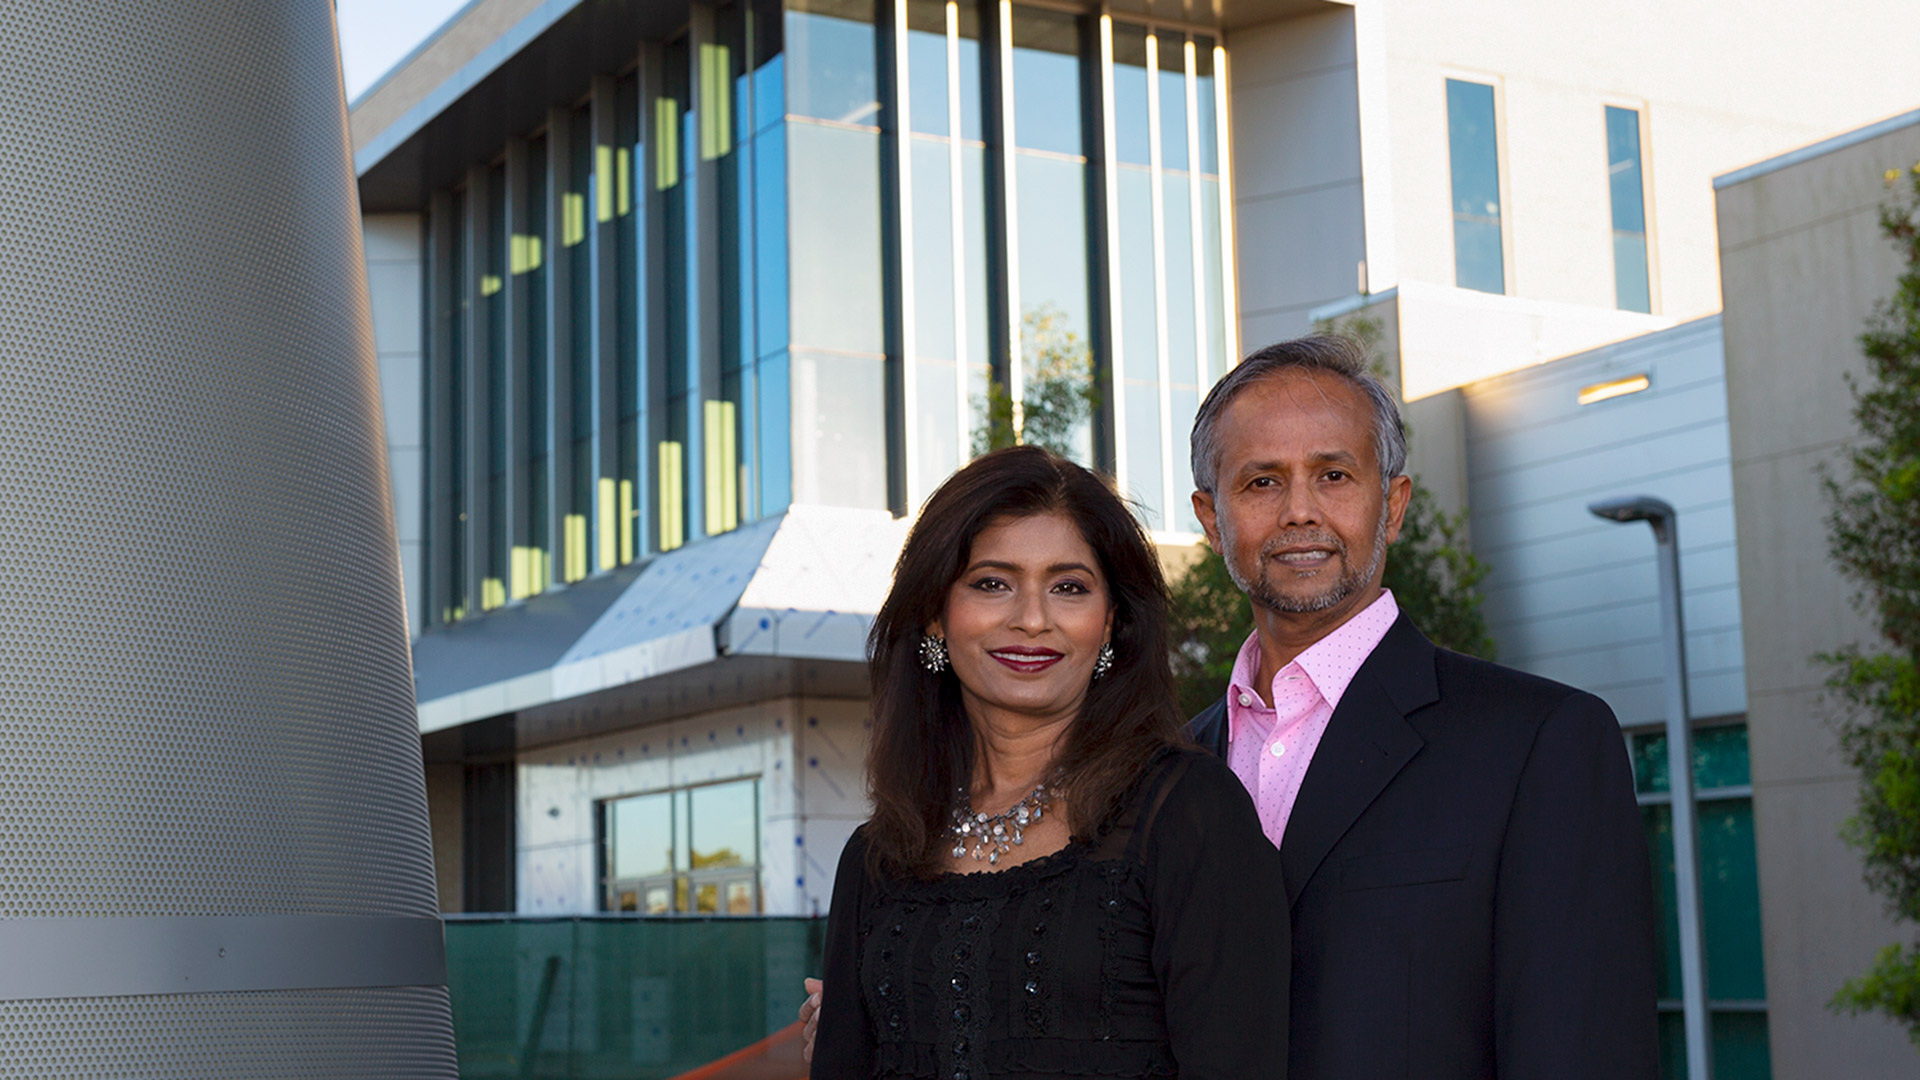 UHCL Pearland Campus donors Nizam and Jesmin Meah. Photo Courtesy of UHCL Marketing and Communications.